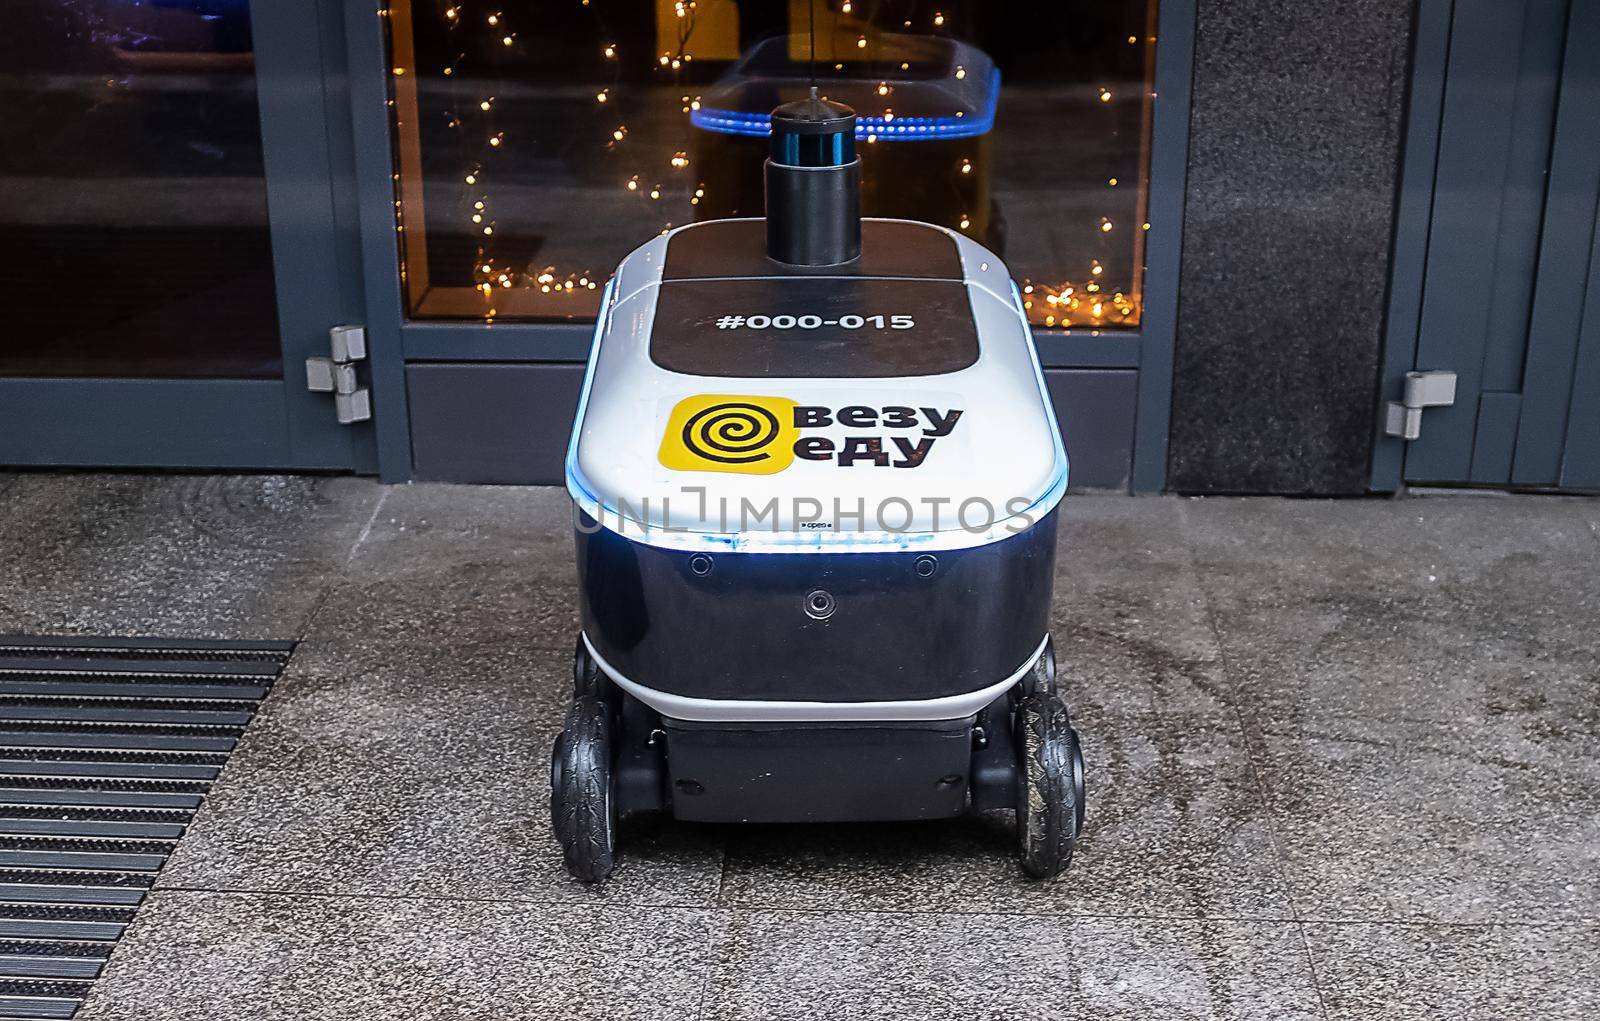 December 14, 2020, Moscow Russia. An unmanned robot courier for delivering food from the Yandex.Rover cafe at the entrance to a restaurant in Moscow.